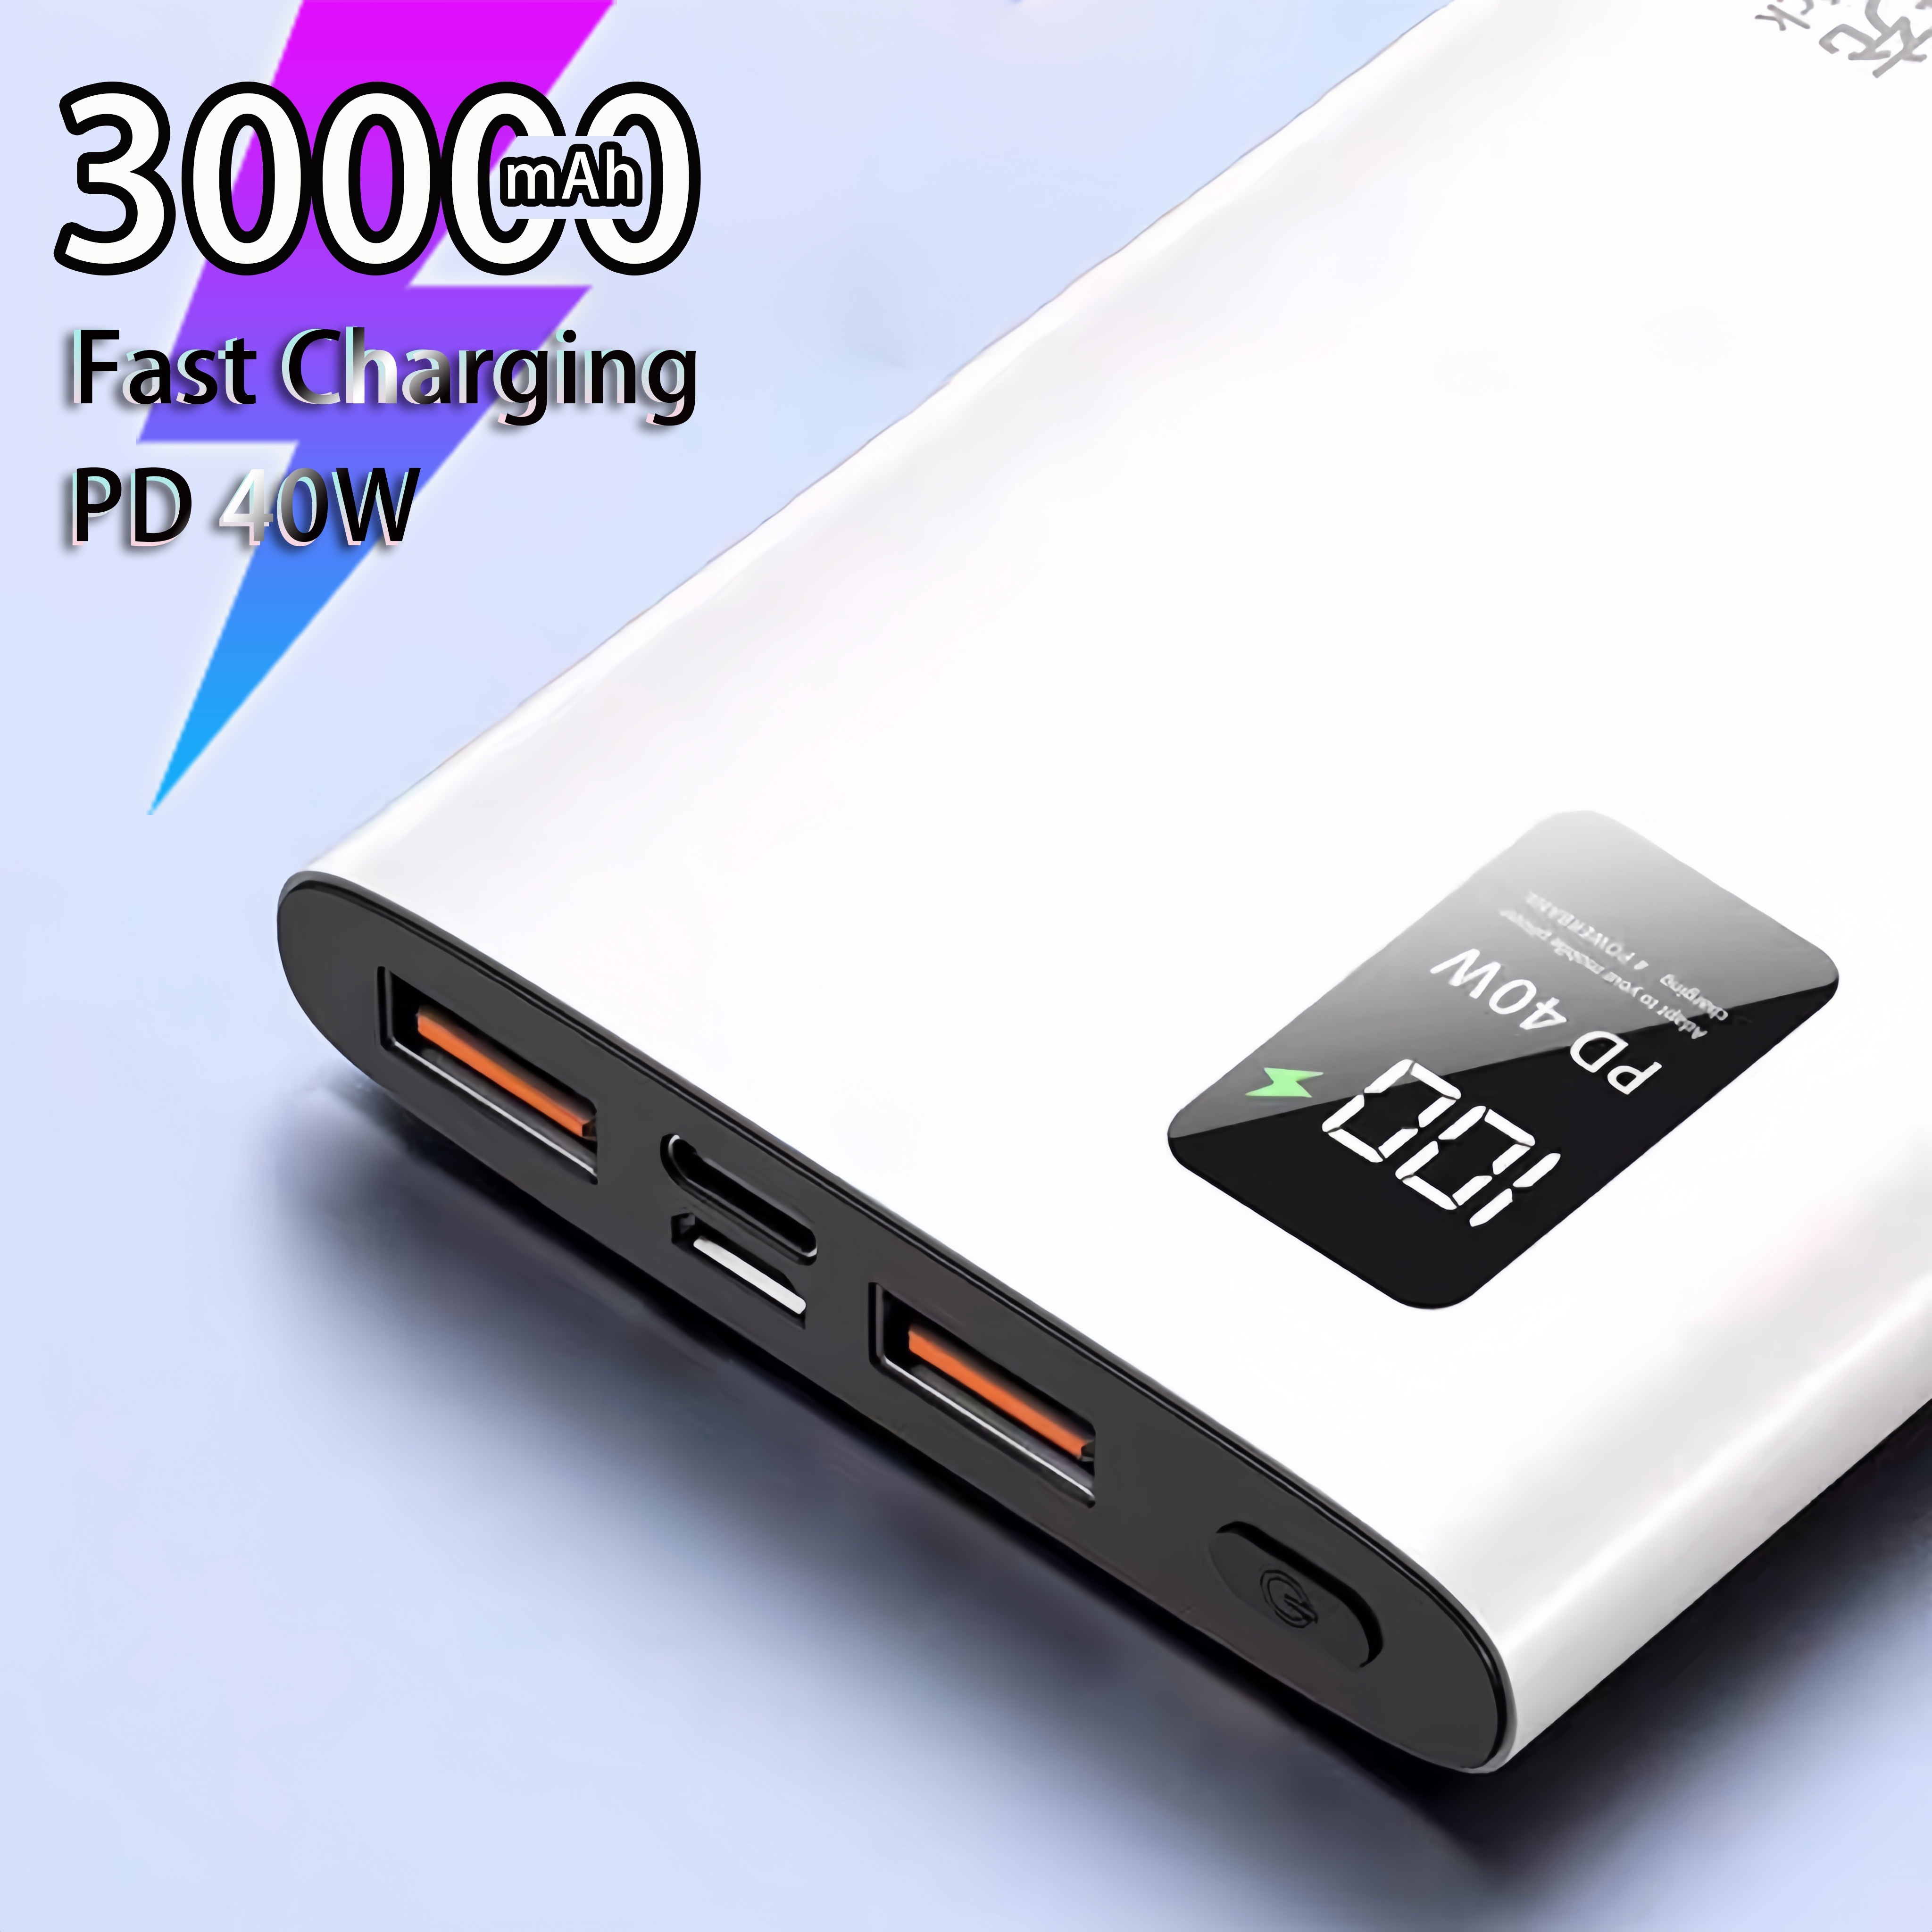  Baseus Power Bank, 65W 20000mAh Laptop Portable Charger, Fast  Charging USB C 4-Port PD3.0 Battery Pack for MacBook Dell XPS IPad iPhone  15/14/13/12 Pro Max Mini Samsung Steam Deck : Cell